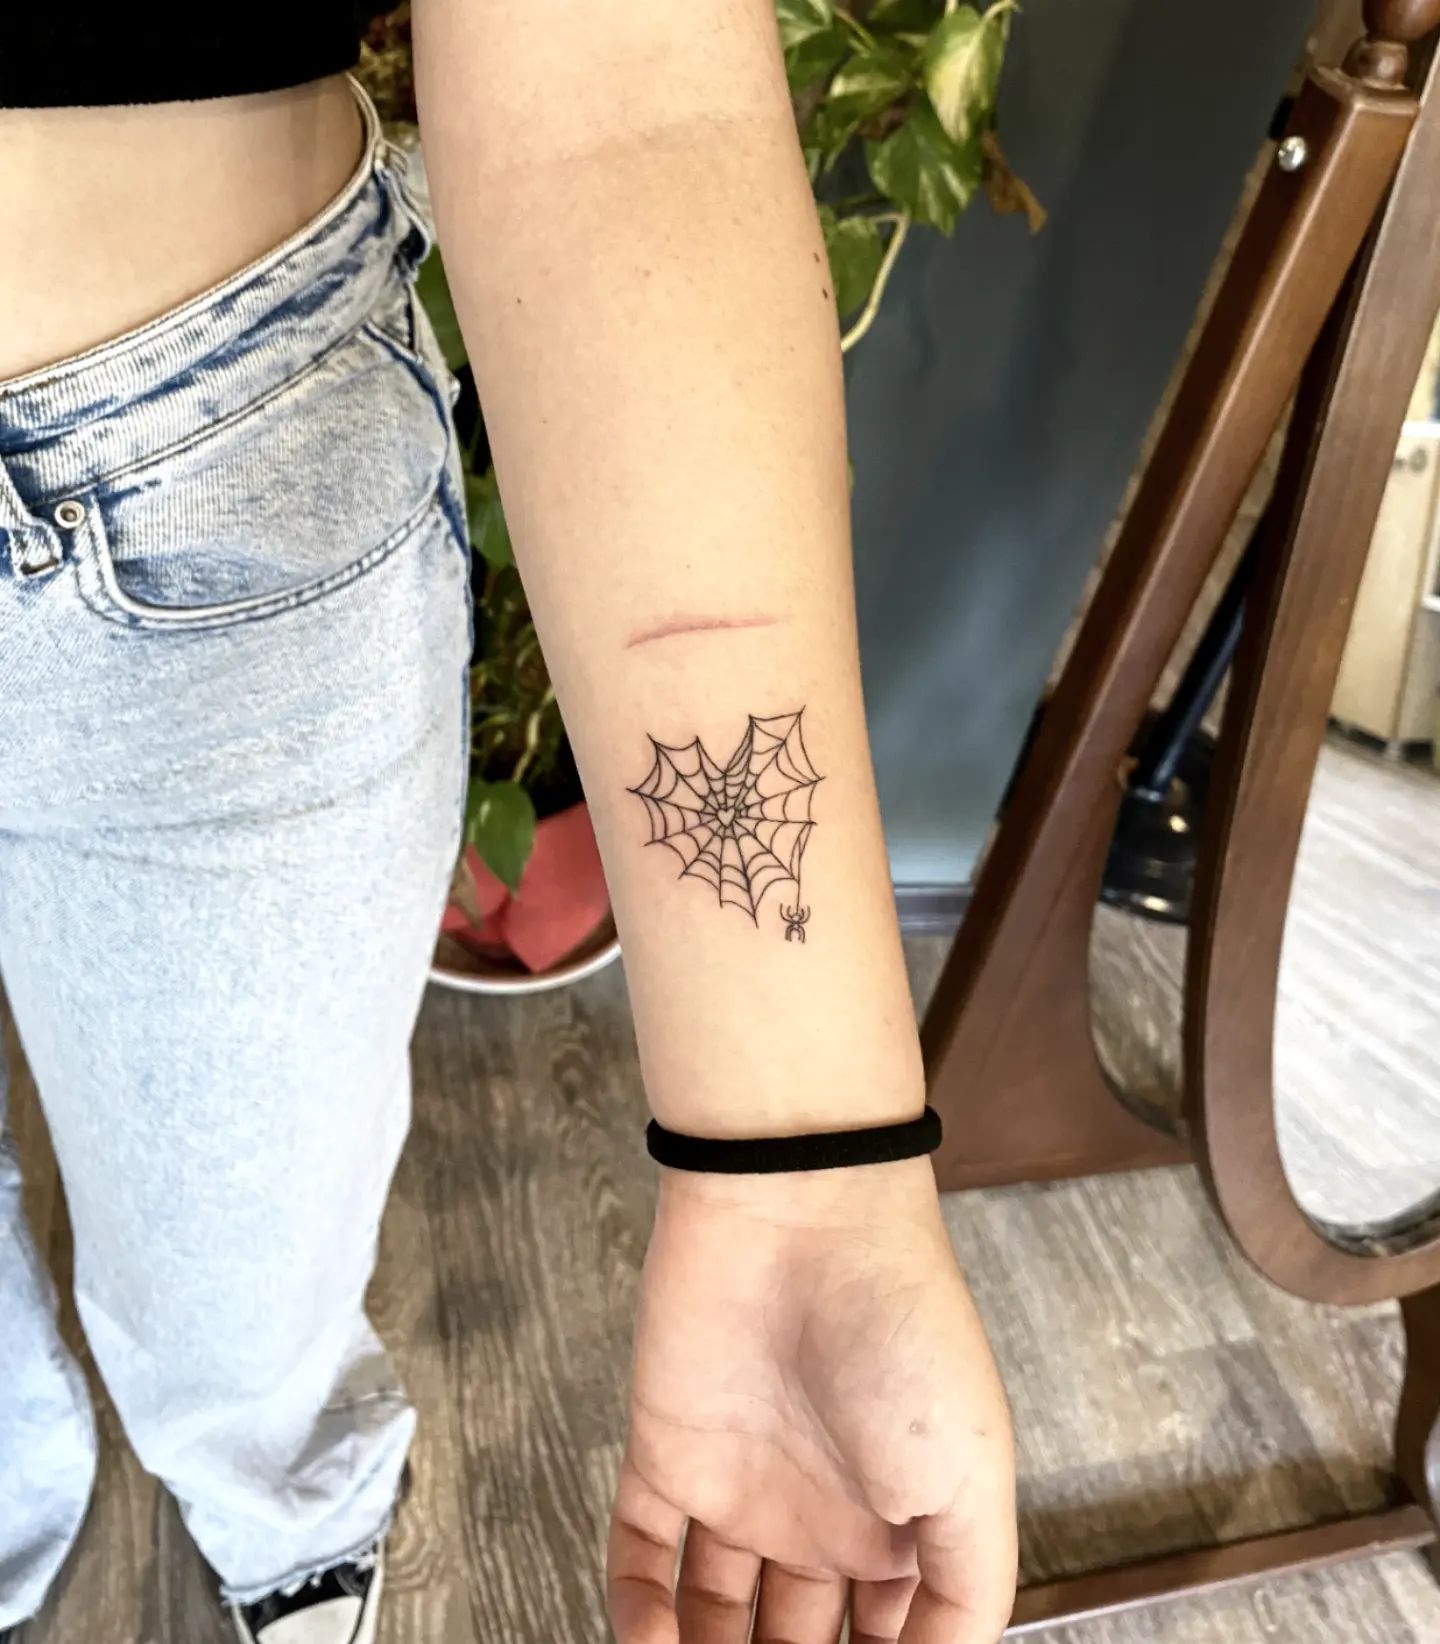 Cool wrist tattoo that most women will fancy. If you like detailed art and you’re into smaller tattoos that aren’t too hard to do, this is it!